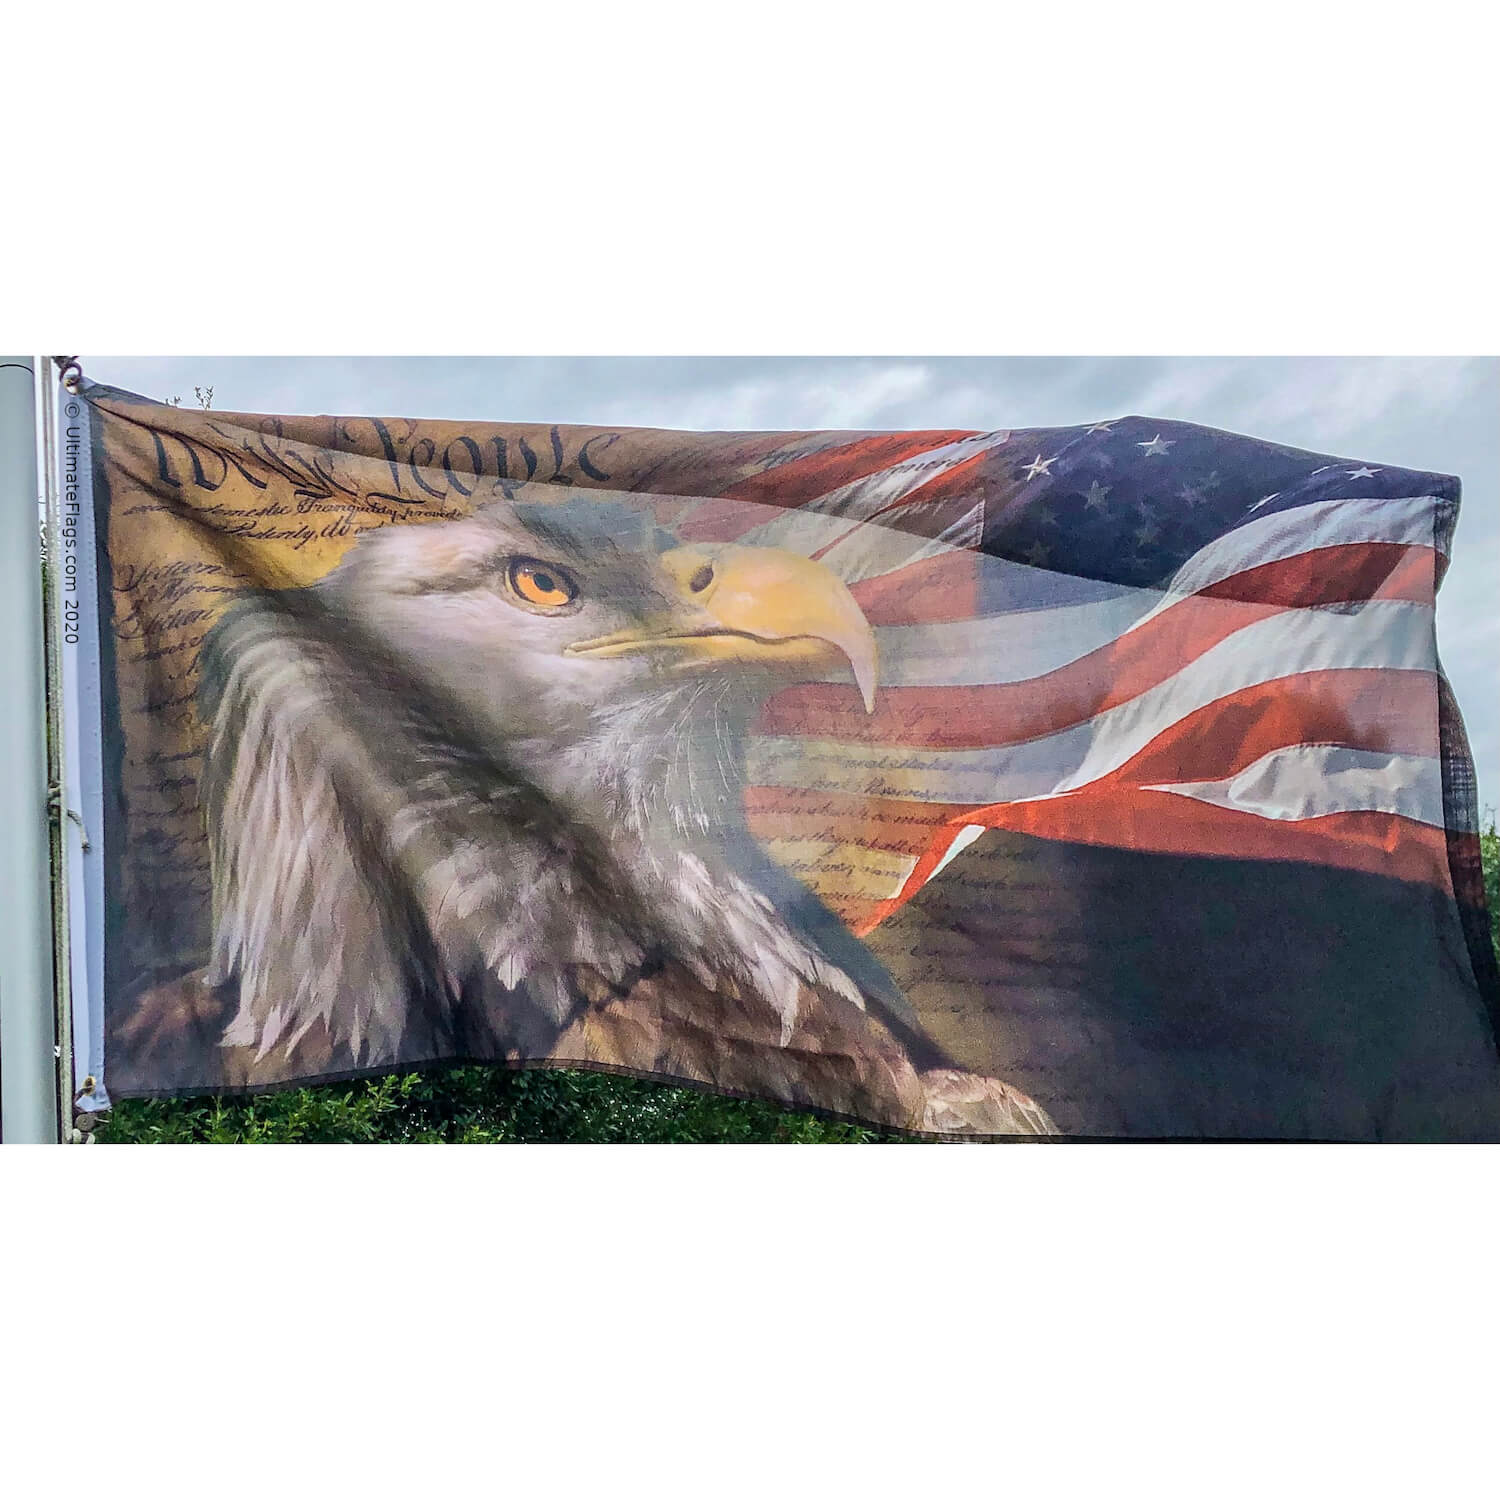 Celebrate Your Heritage with Ultimate Flags Inc